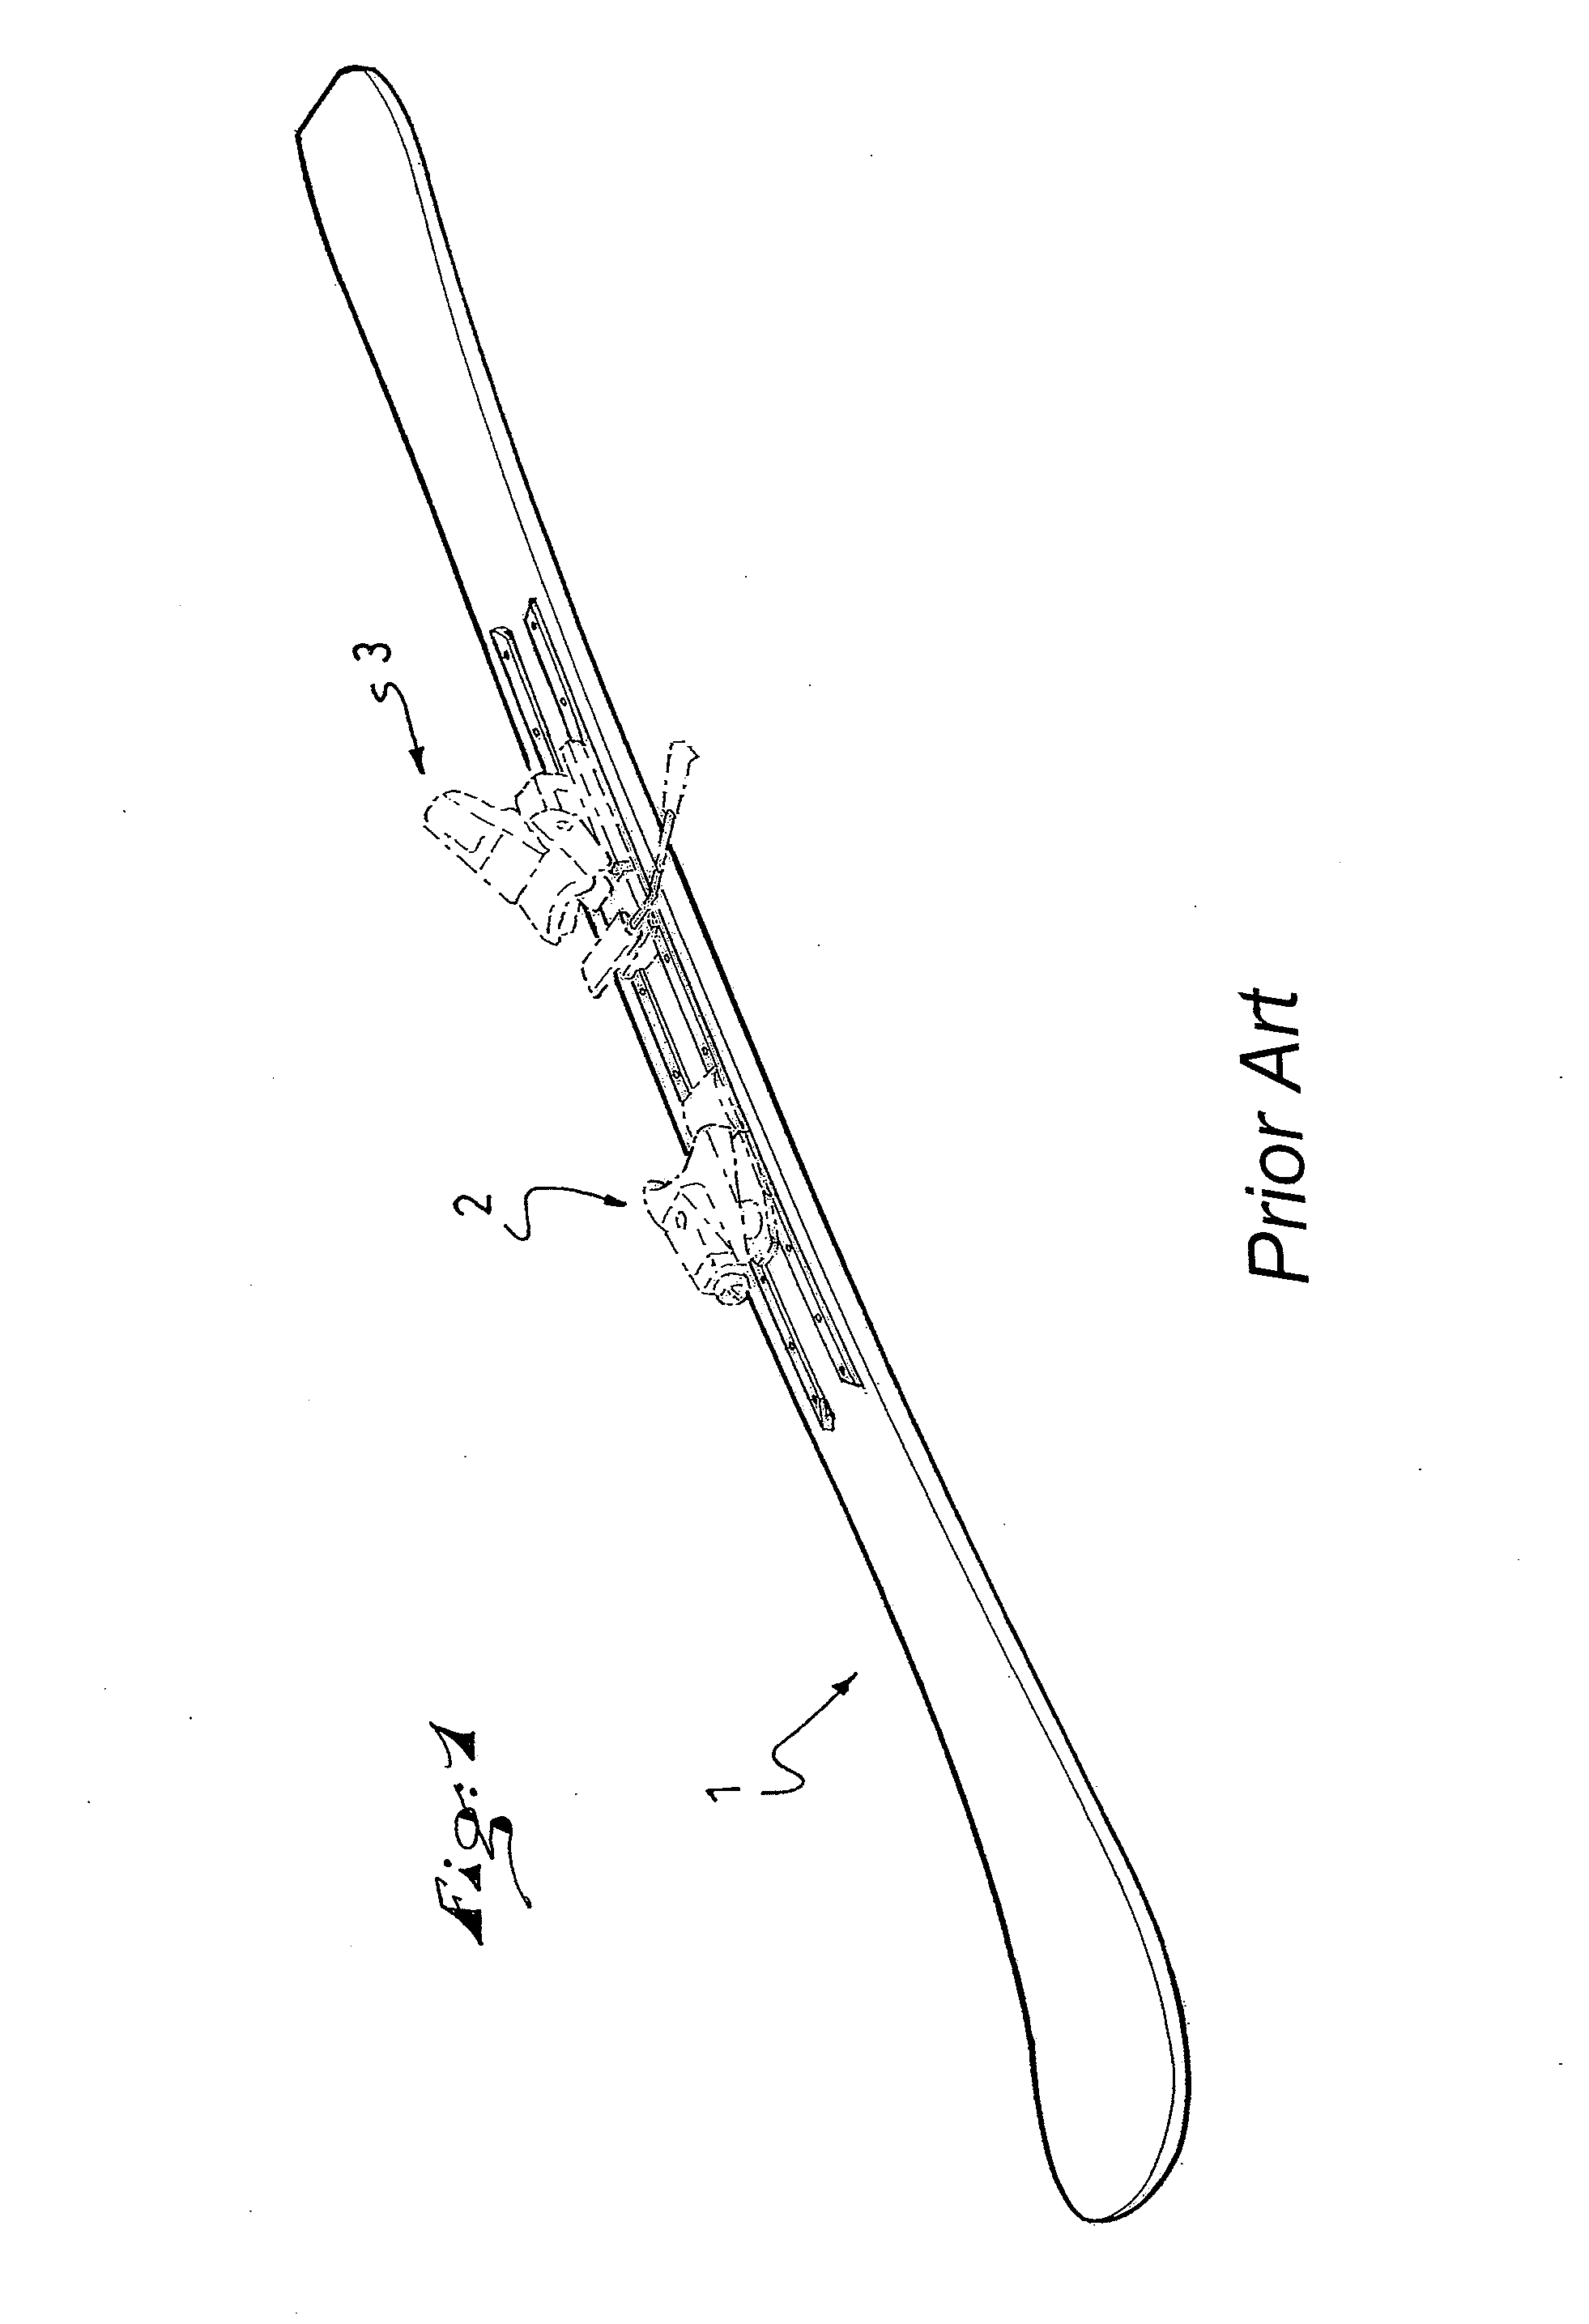 Interface device for a gliding board